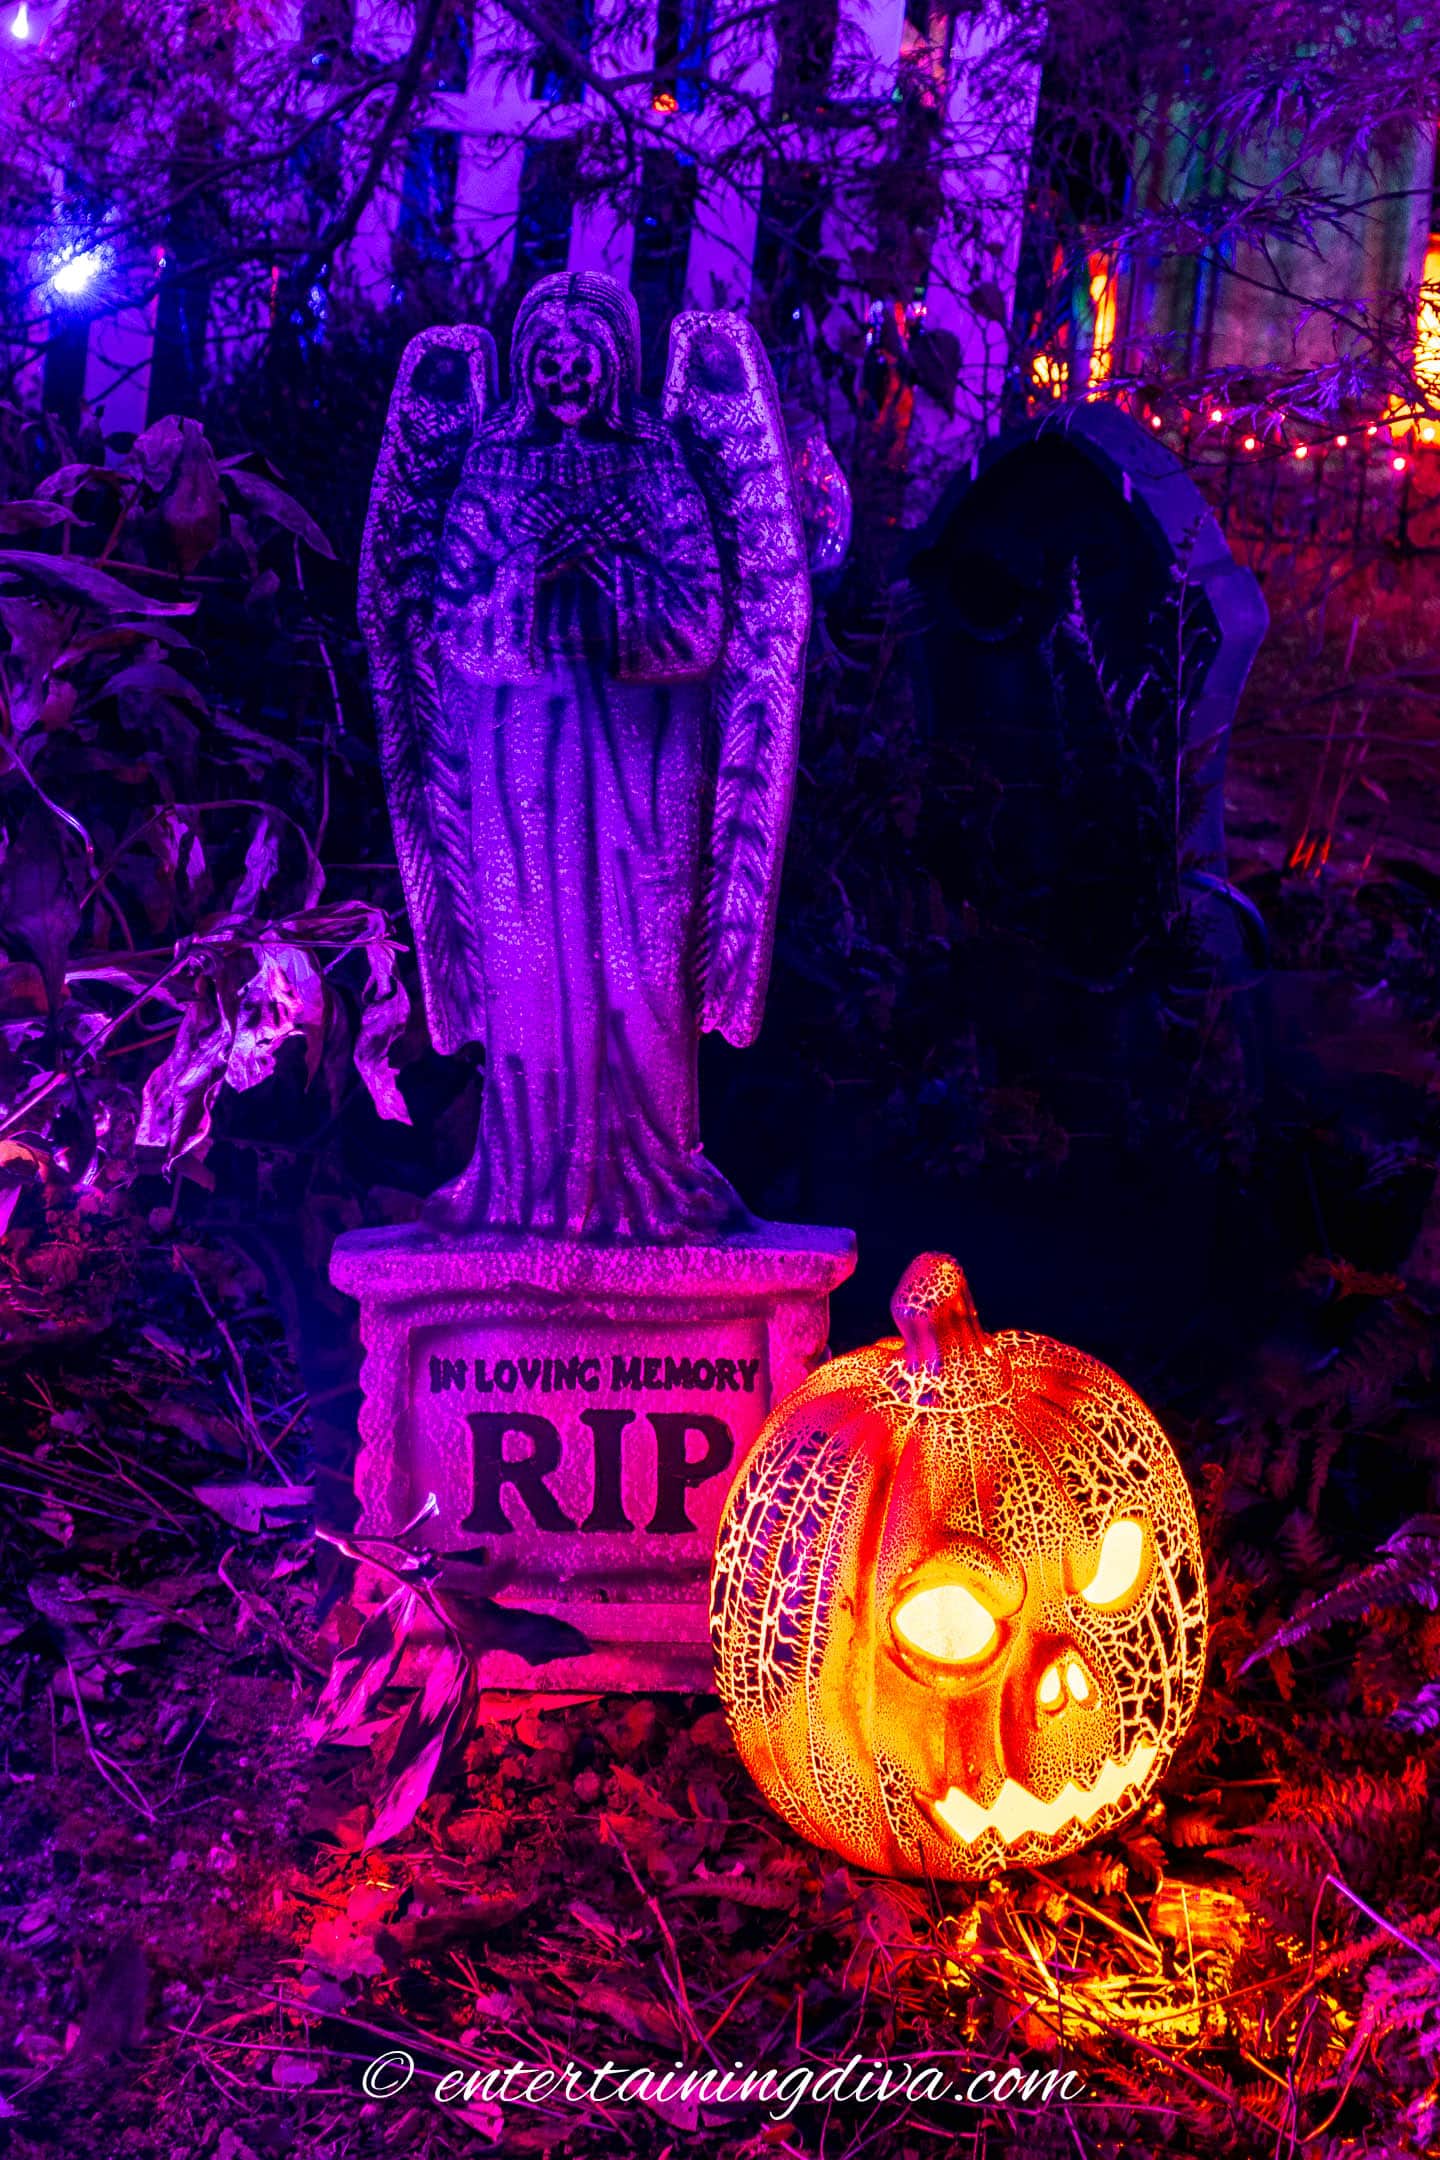 An outdoor lighted pumpkin in front of a Halloween tombstone at night.